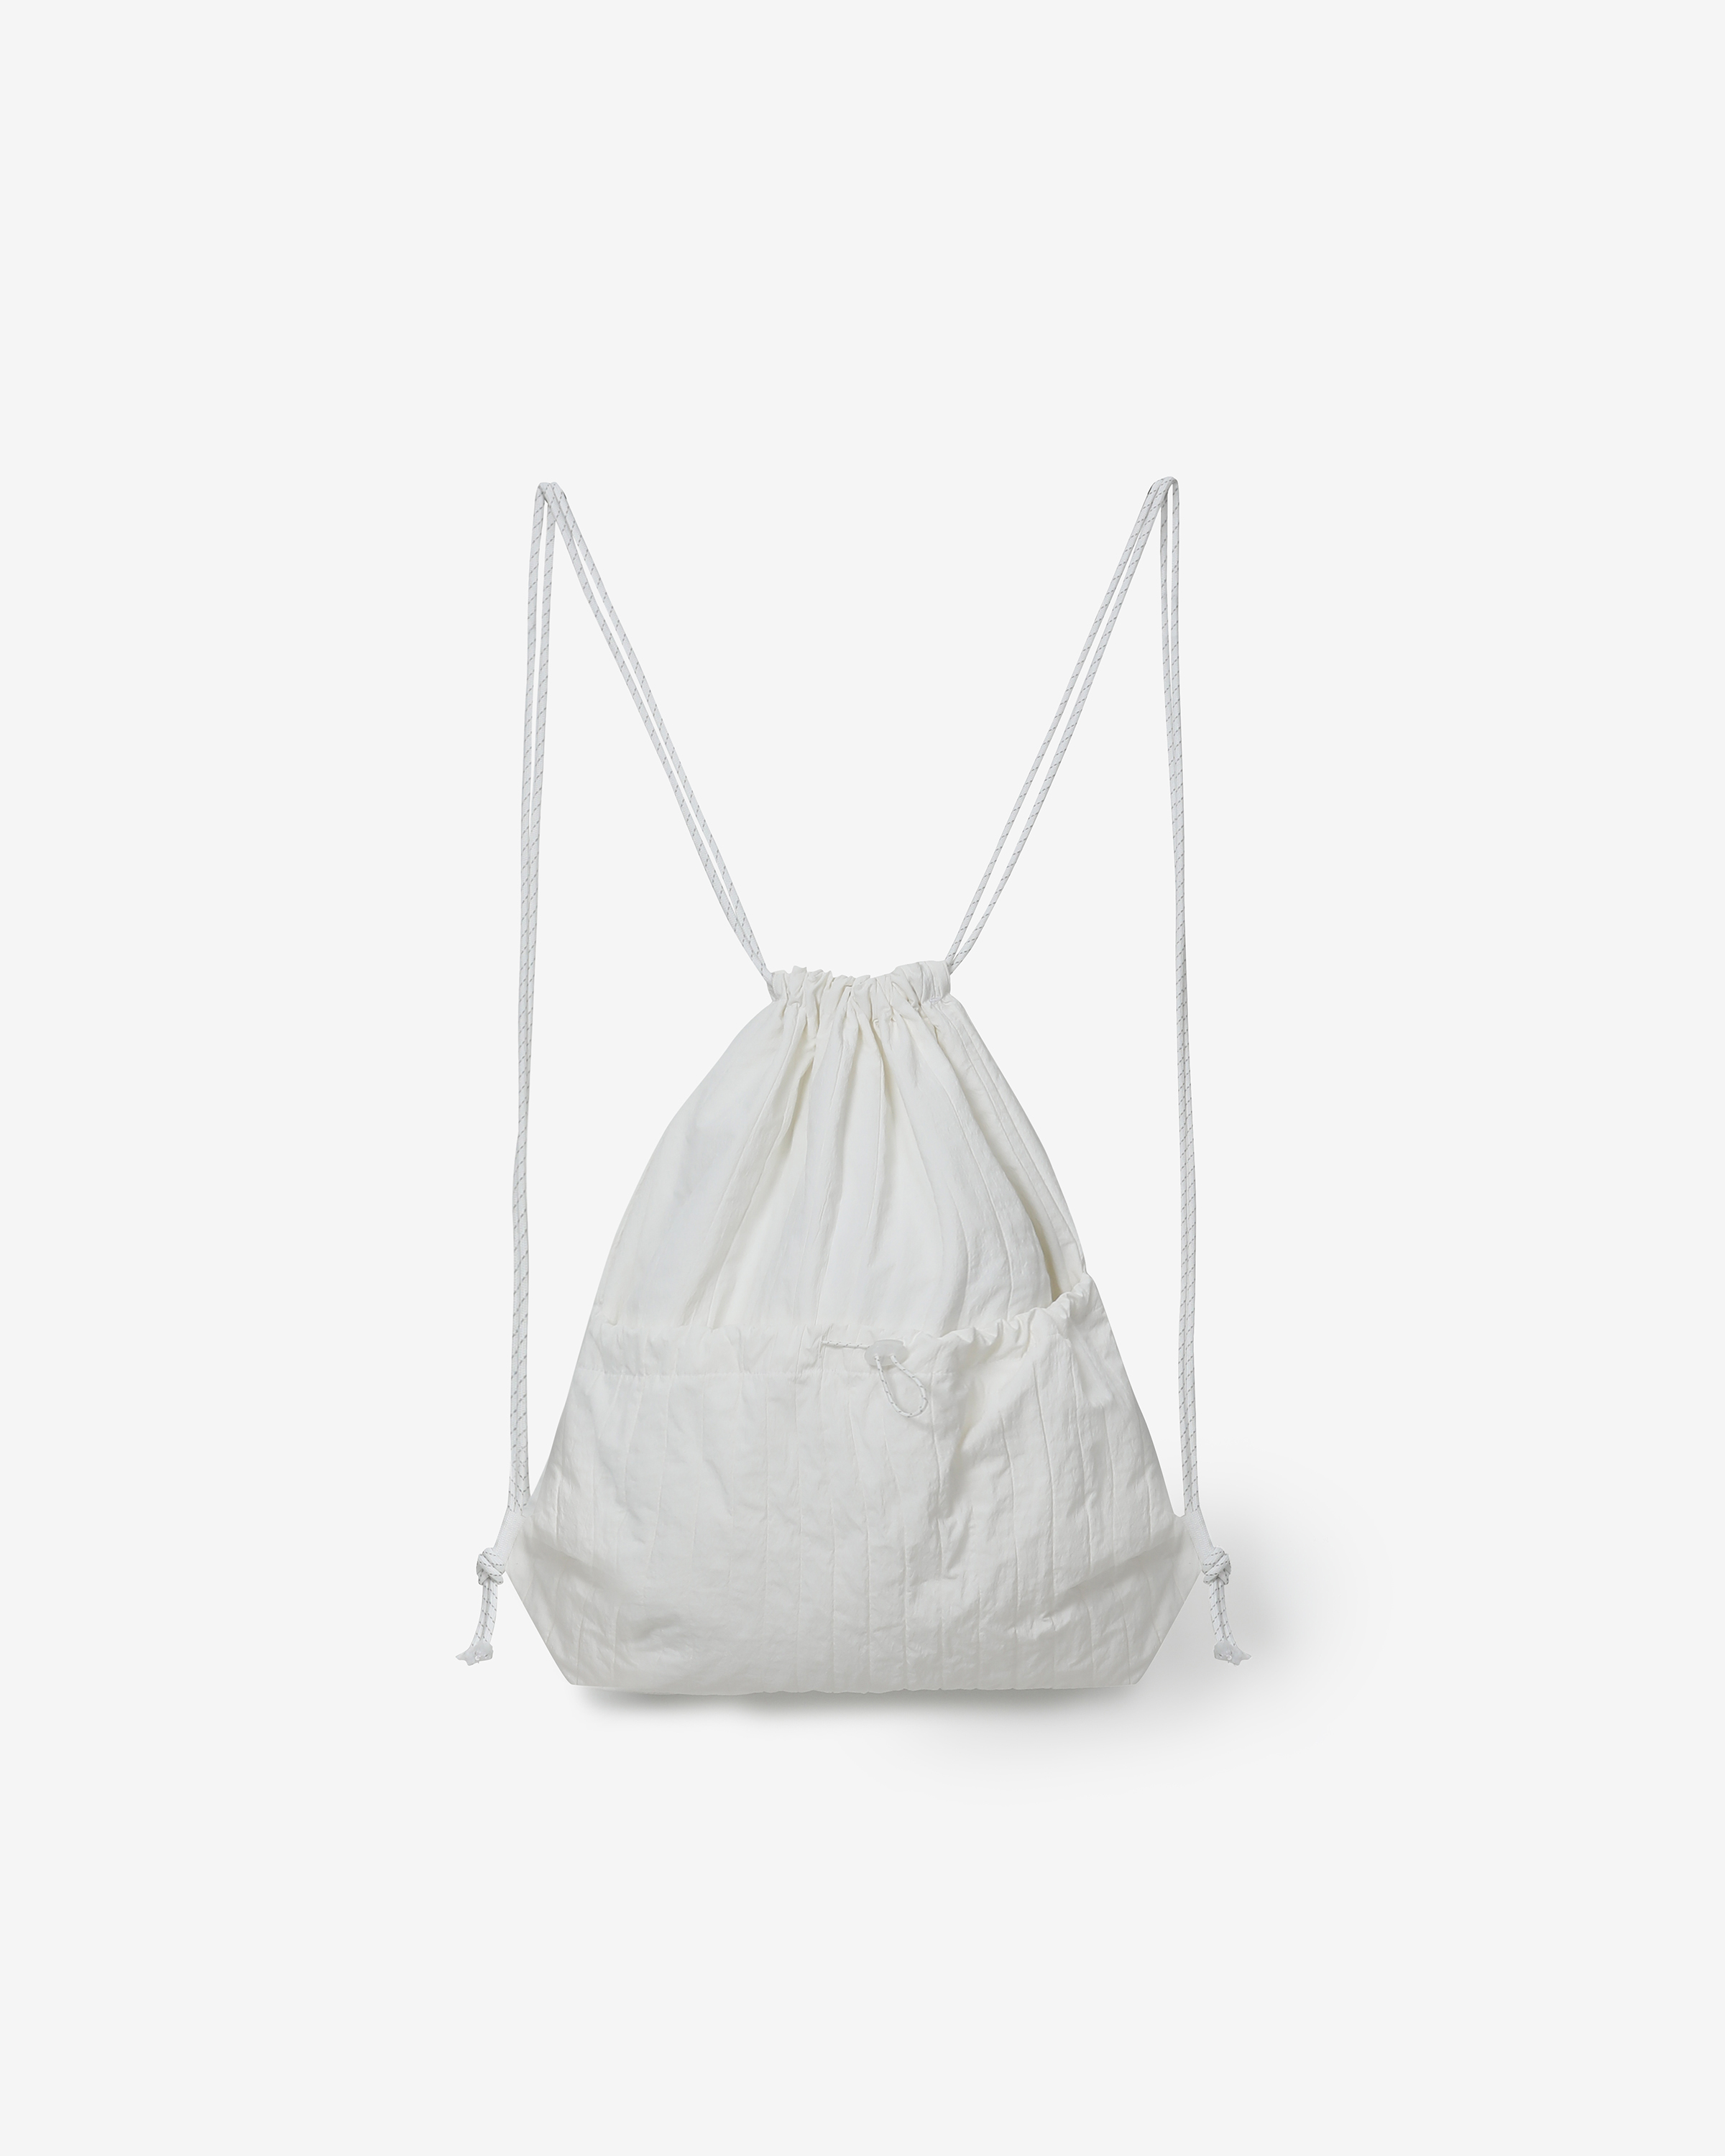 3M string bag [ quilted ivory ]